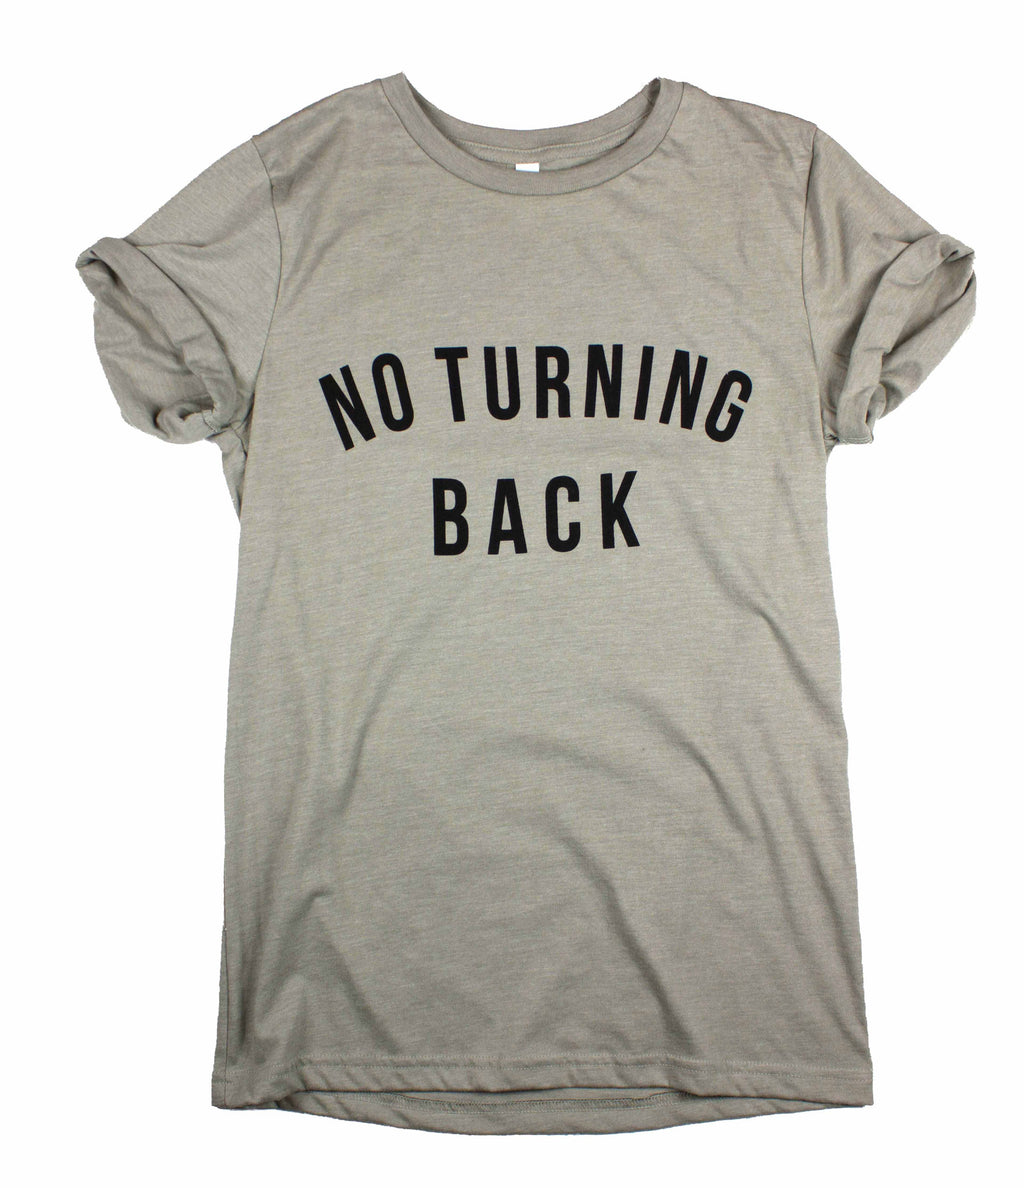 NO TURNING BACK CONCRETE ROLLED SLEEVE T-SHIRT